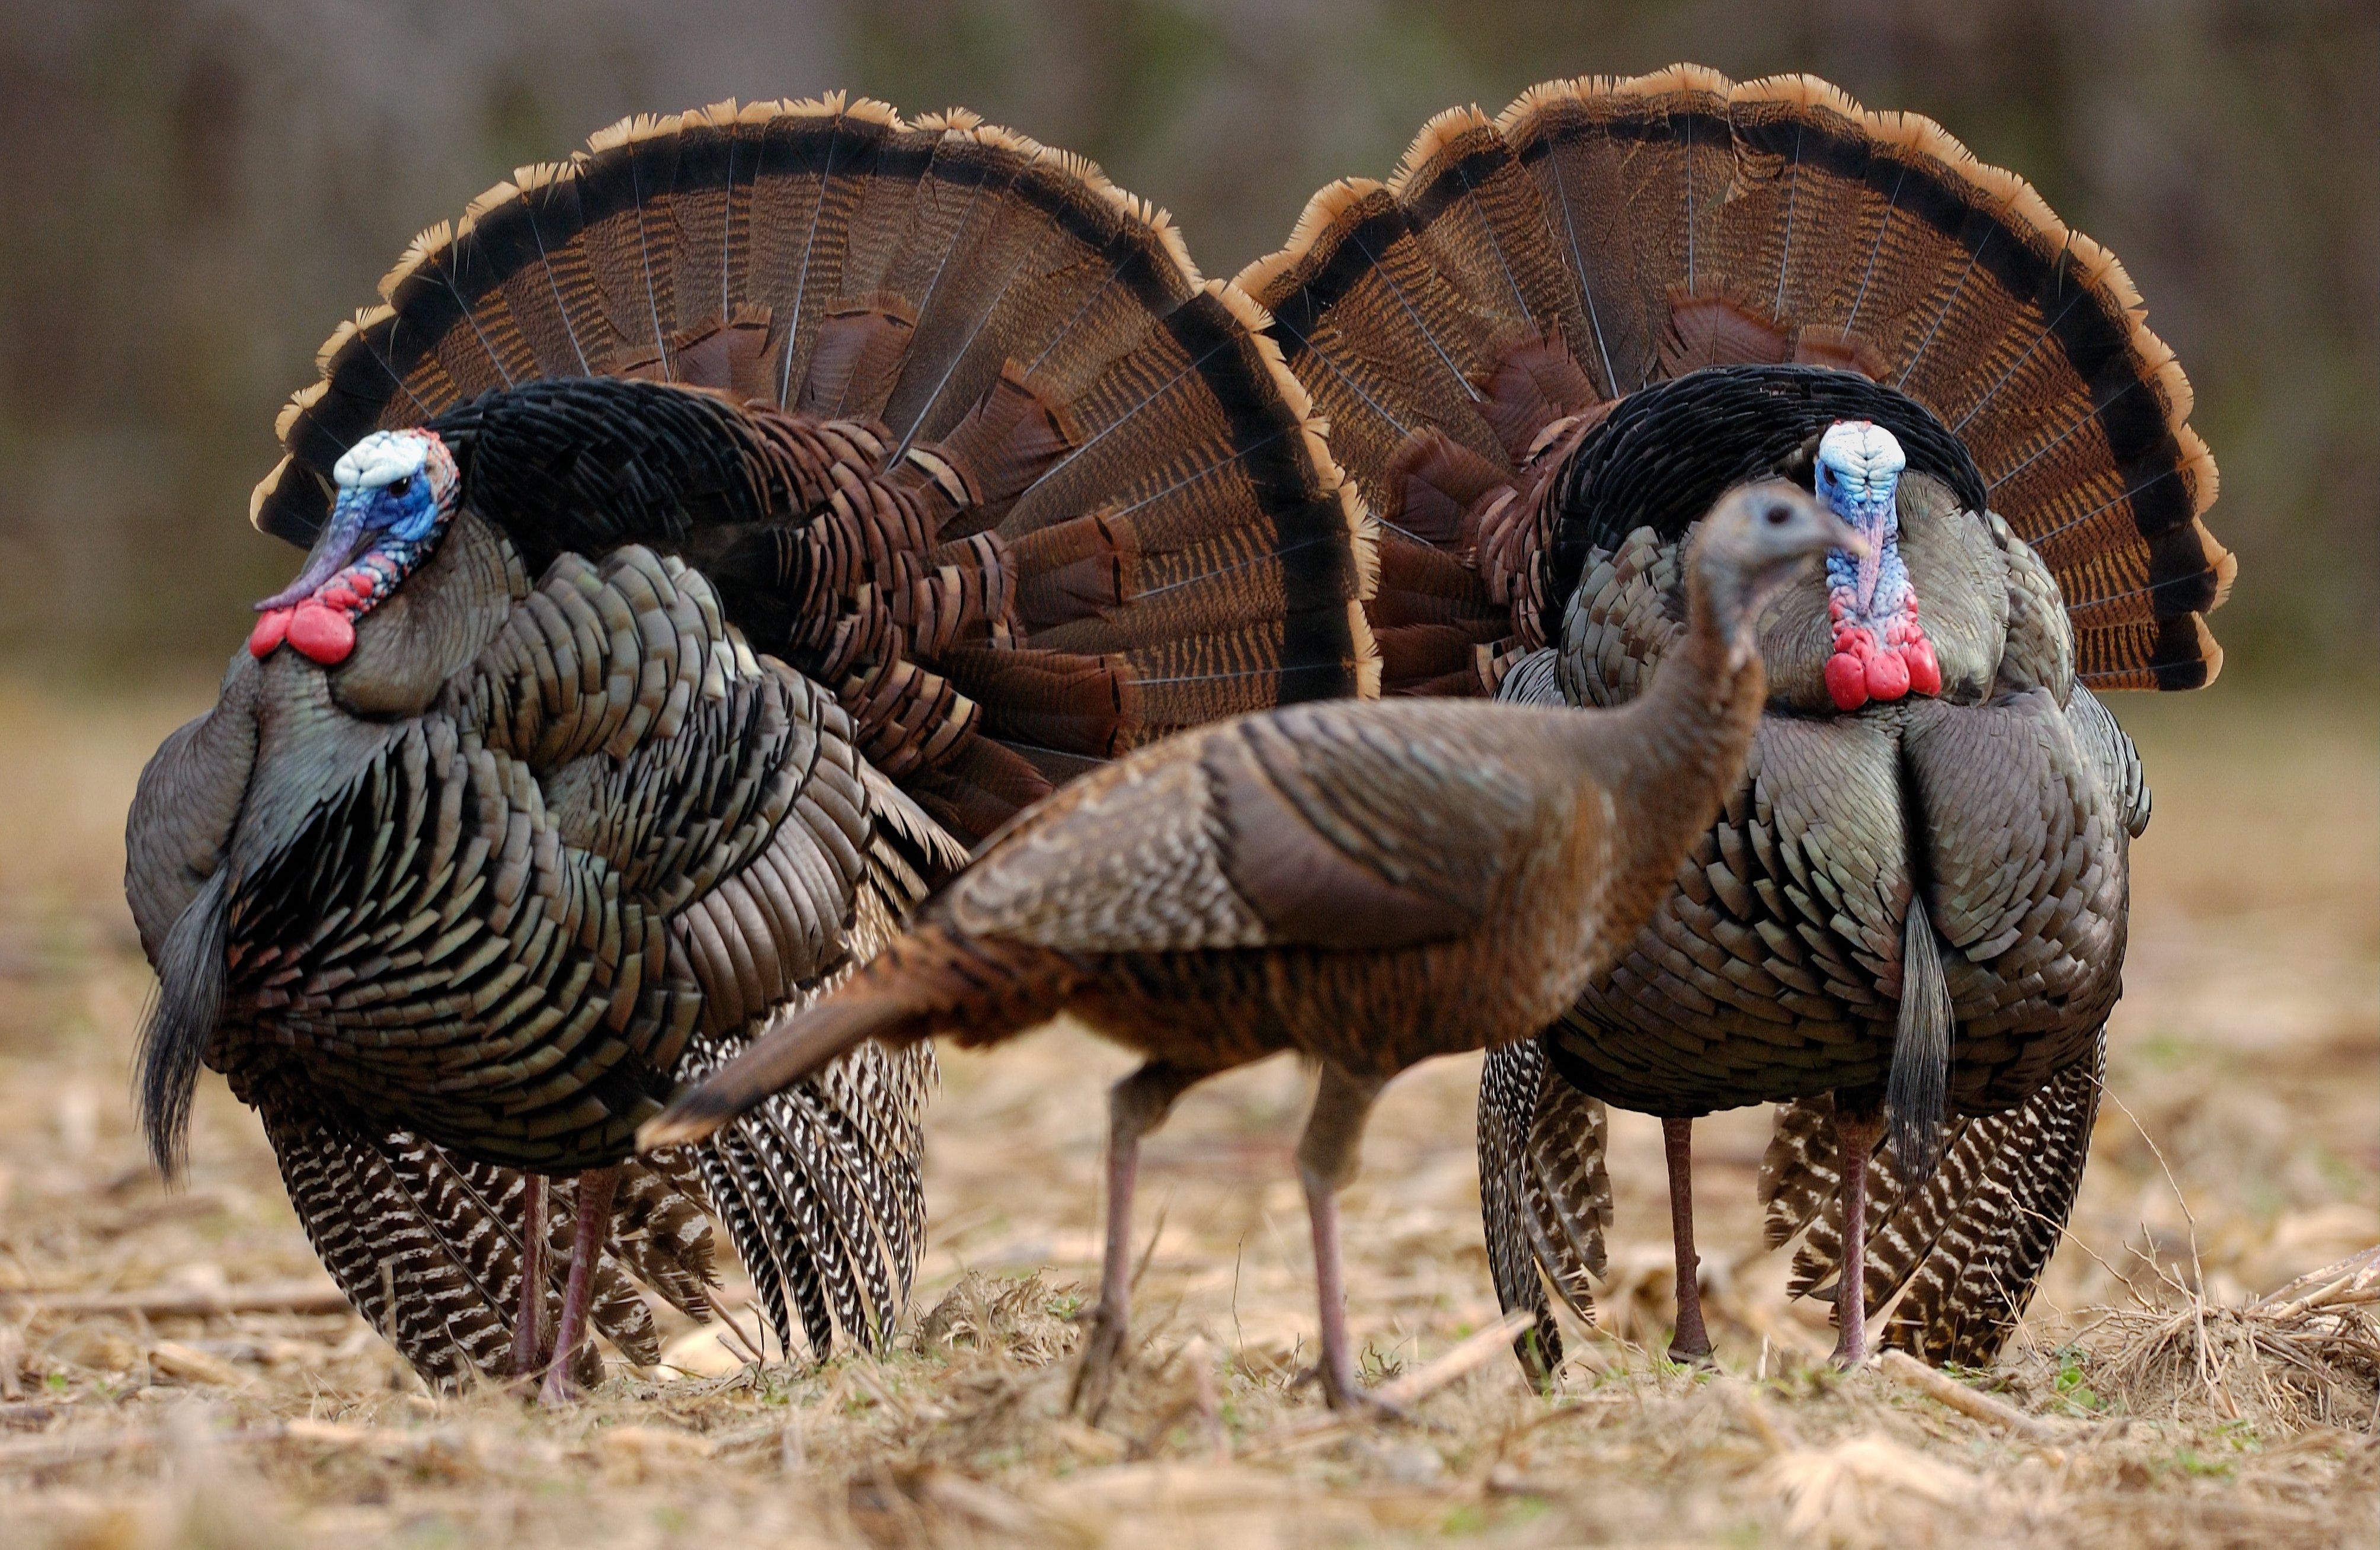 Turkey Hunting in Connecticut. Image by Tes Randle Jolly